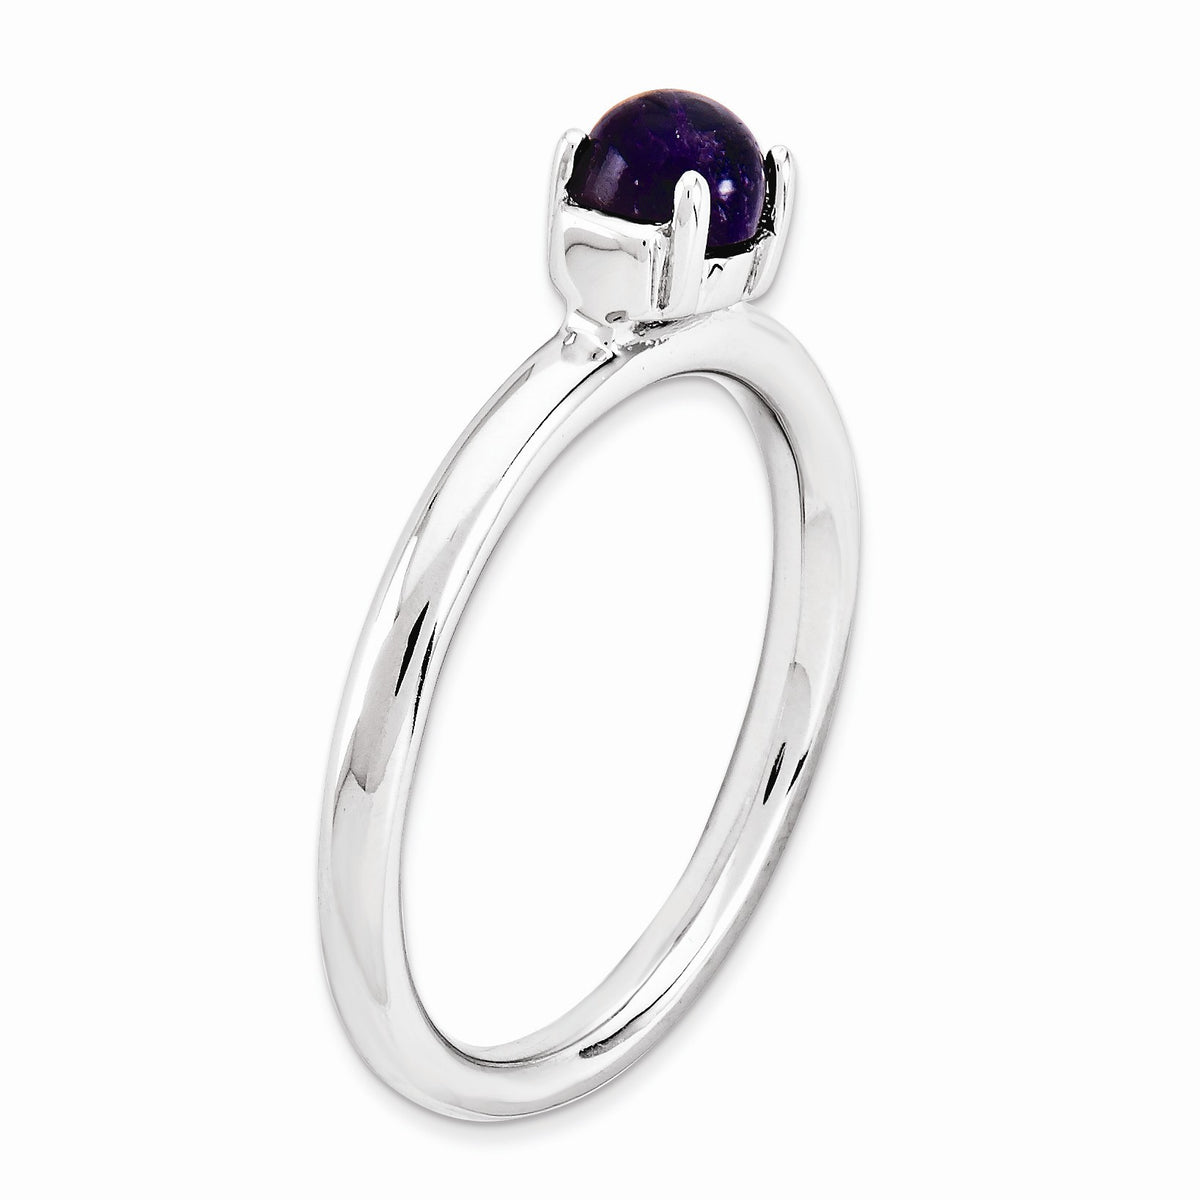 Alternate view of the Sterling Silver &amp; Amethyst 5mm Round Cabochon Solitaire Stackable Ring by The Black Bow Jewelry Co.